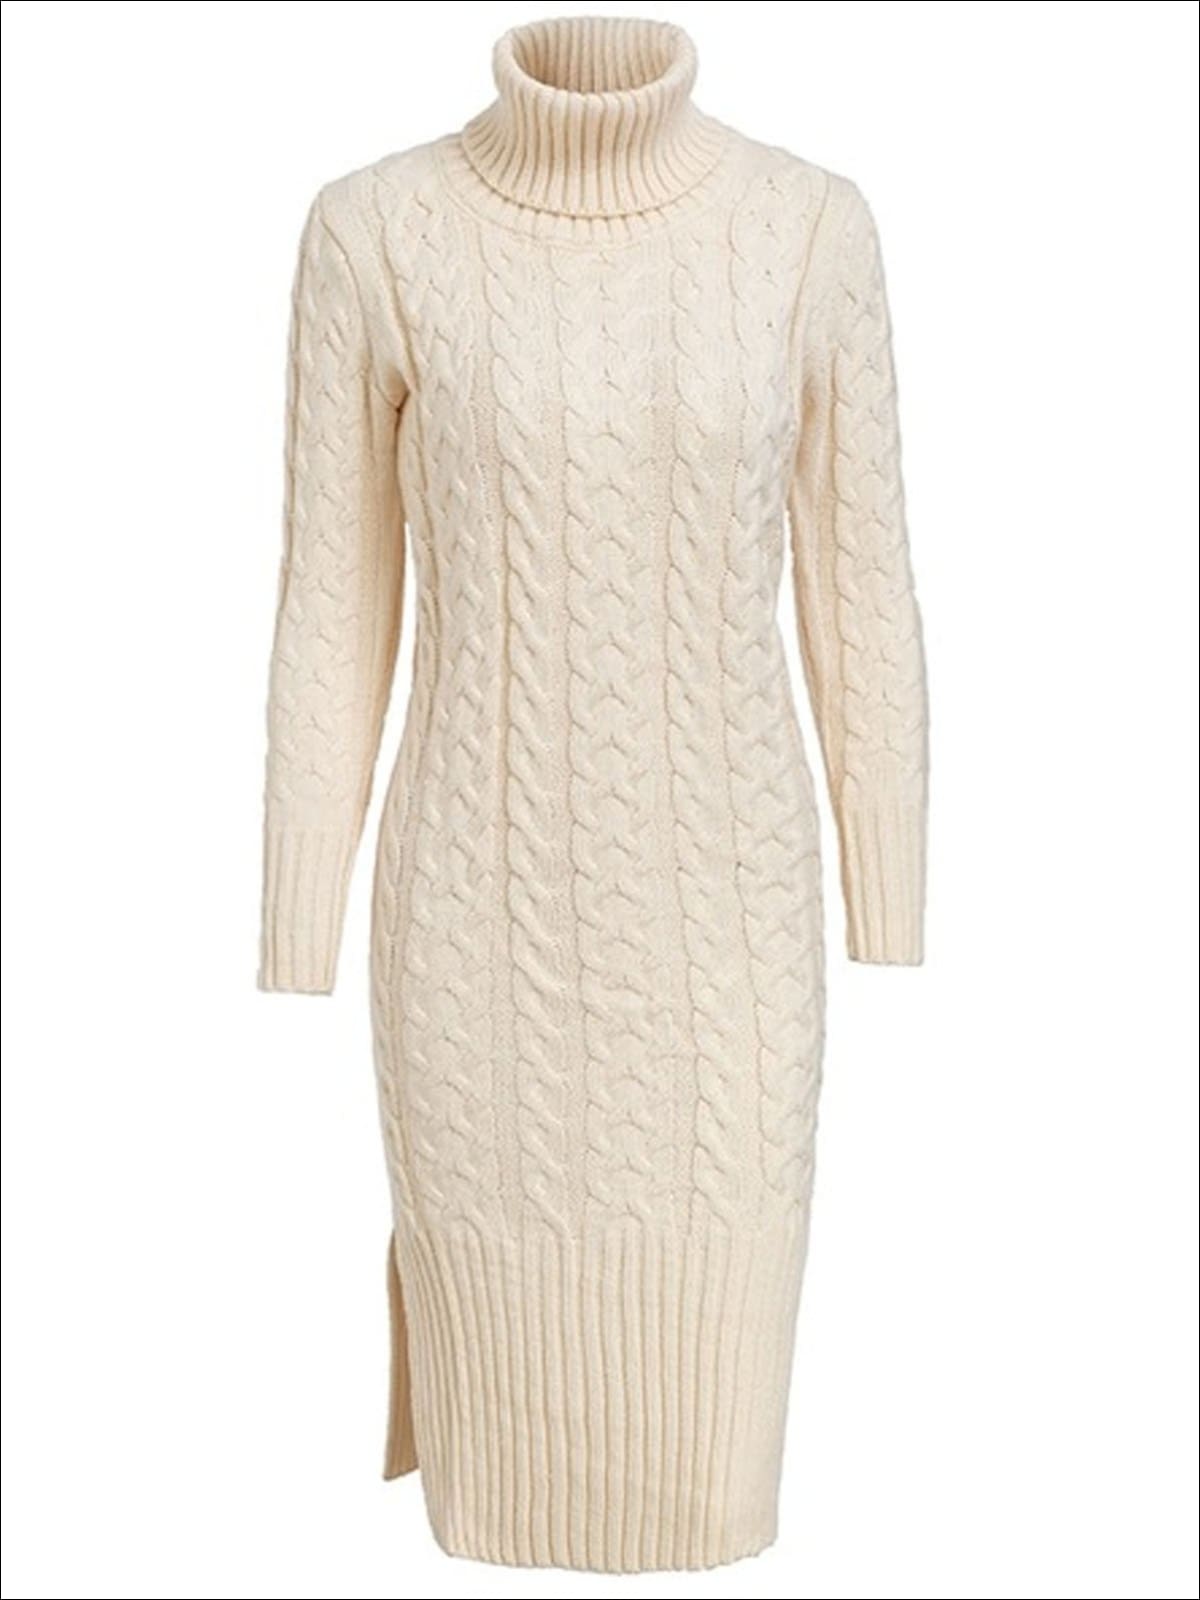 Womens Fall Cable Knit Turtleneck Sweater Dress - Beige / One Size - Womens Fall Dresses